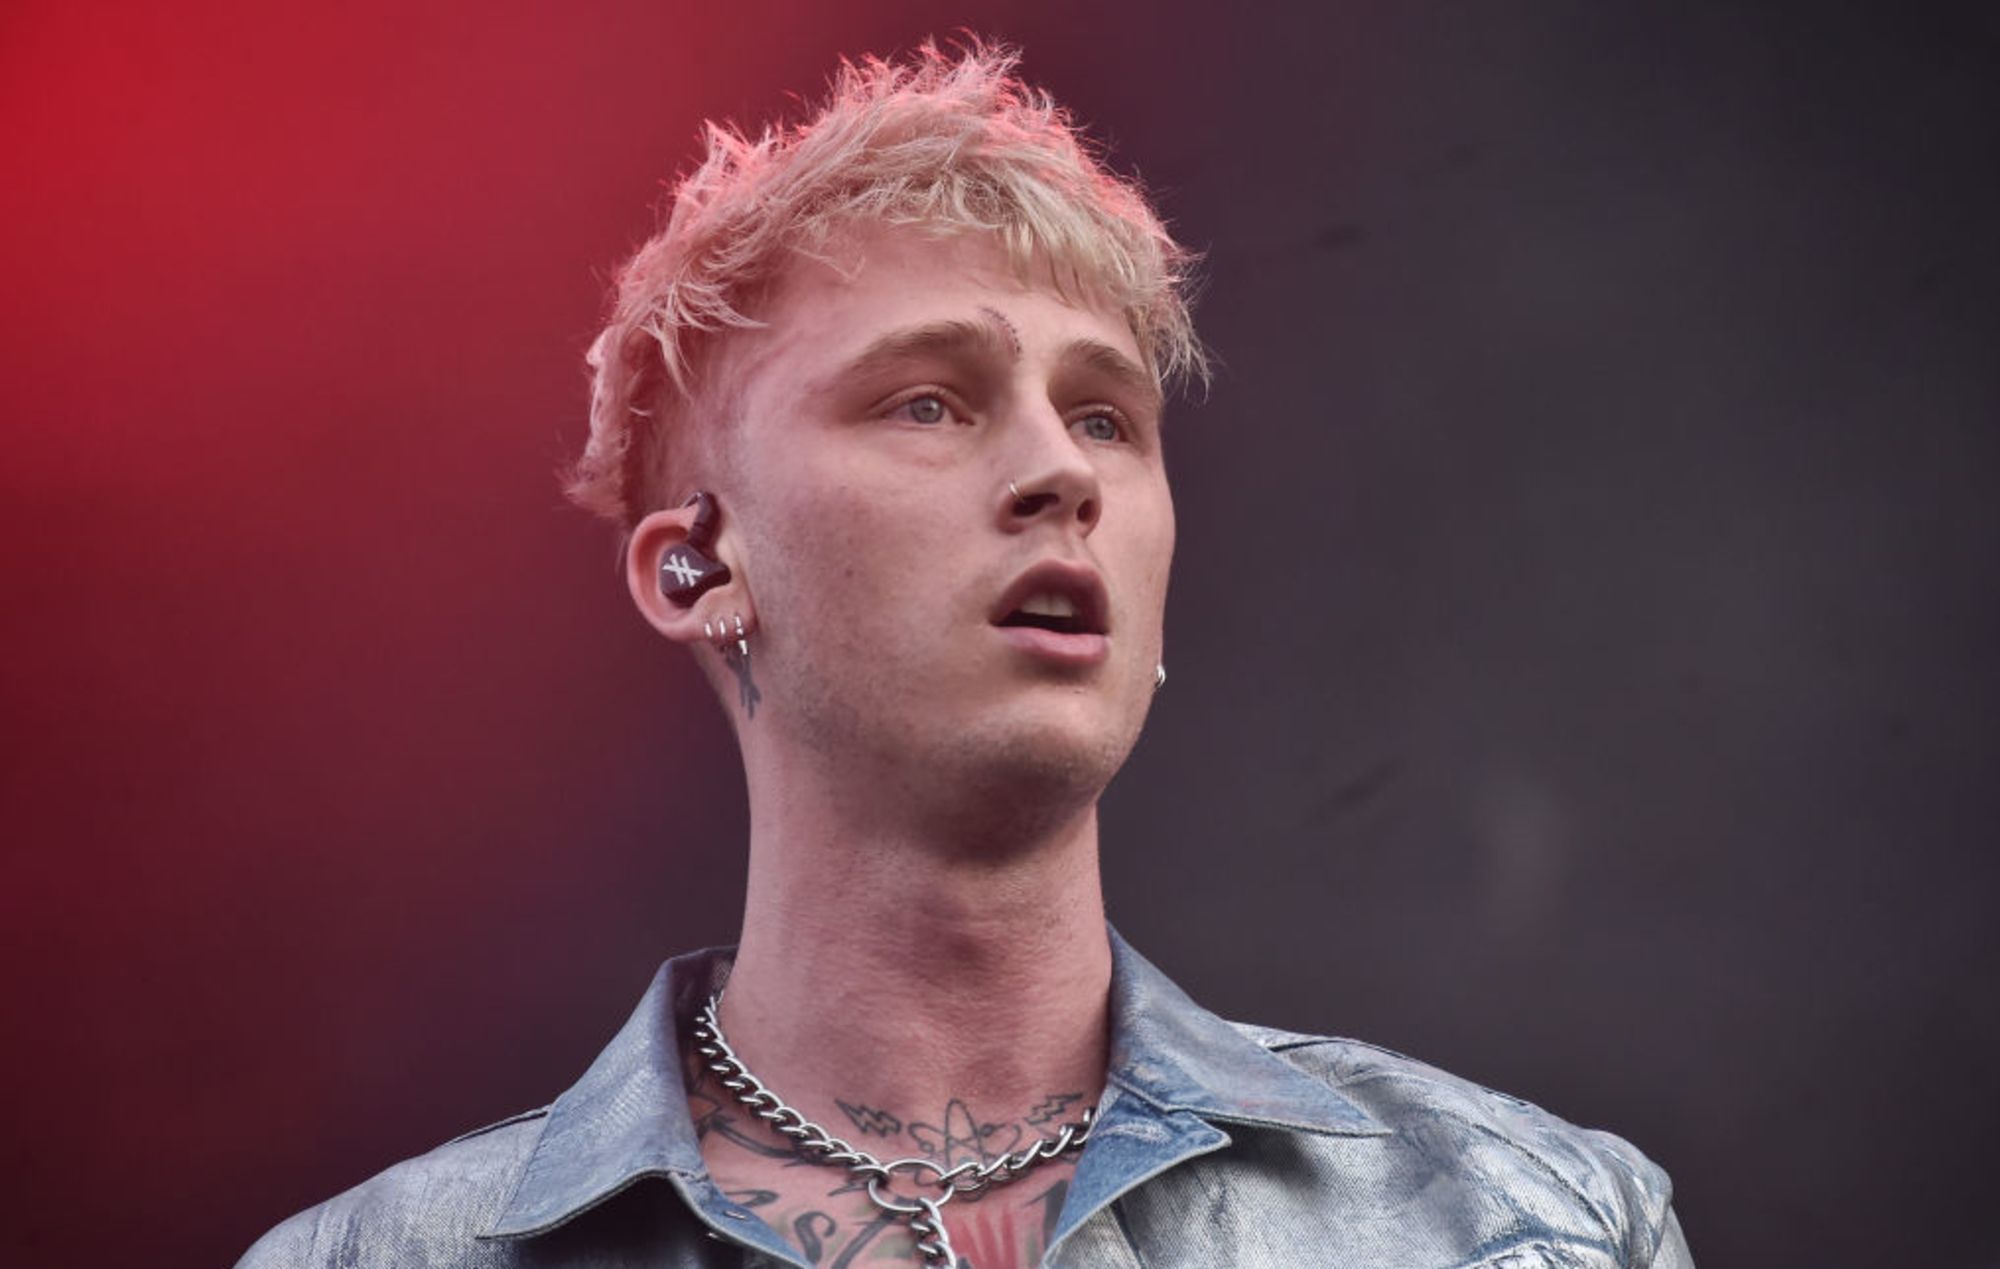 Machine Gun Kelly shares 'Tickets To My Downfall' cover shoot video